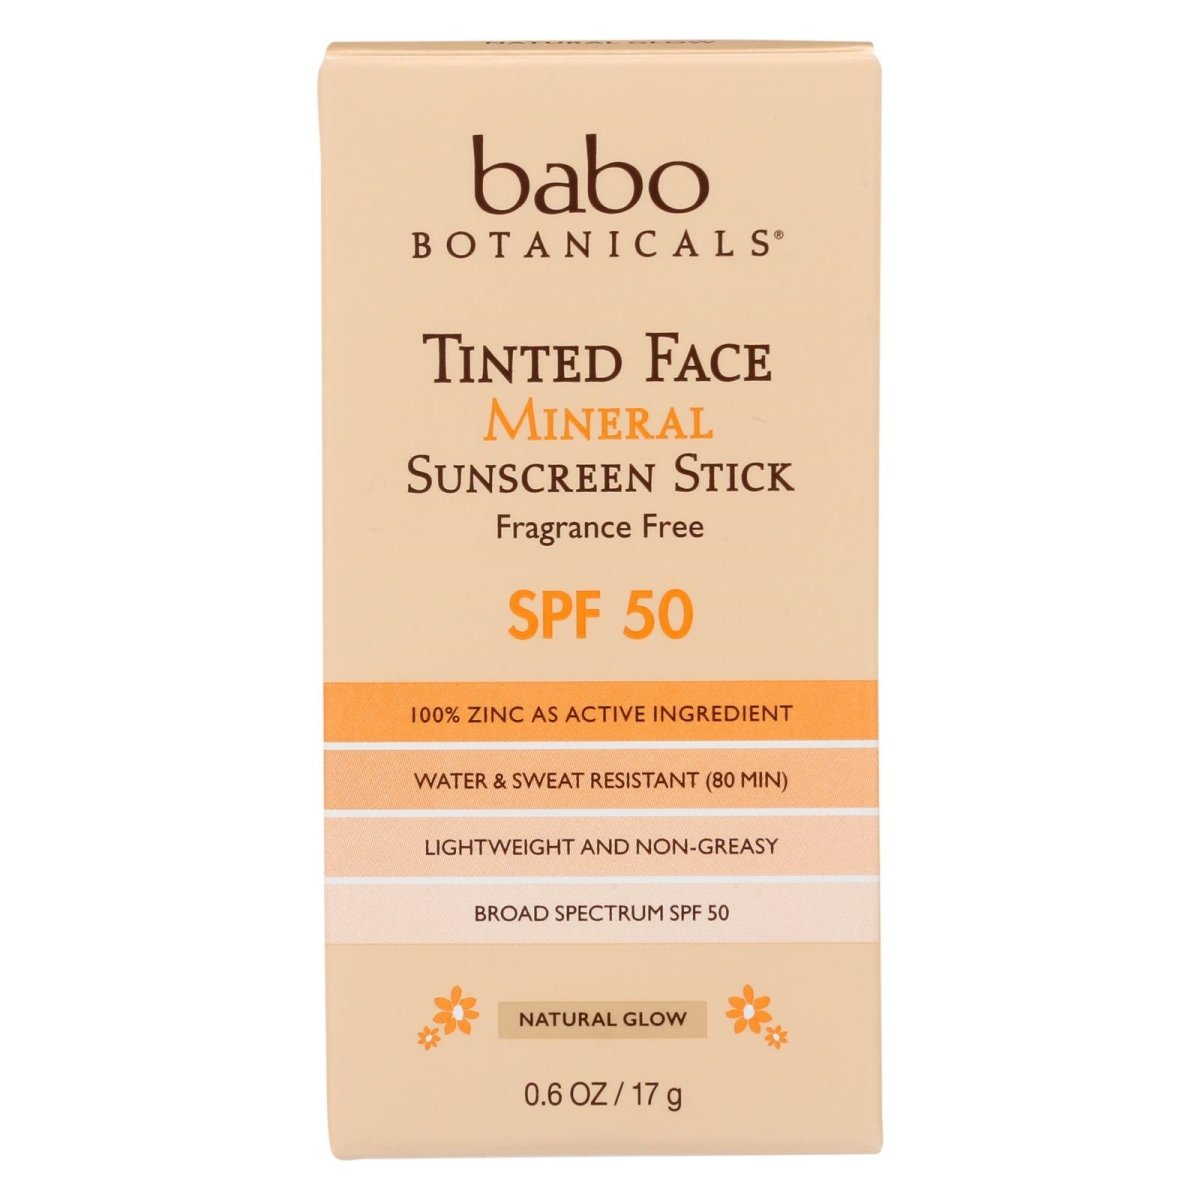 2359610 0.6 Oz Tinted Face Mineral Sunscreen Stick - Spf 50 - Case Of 6